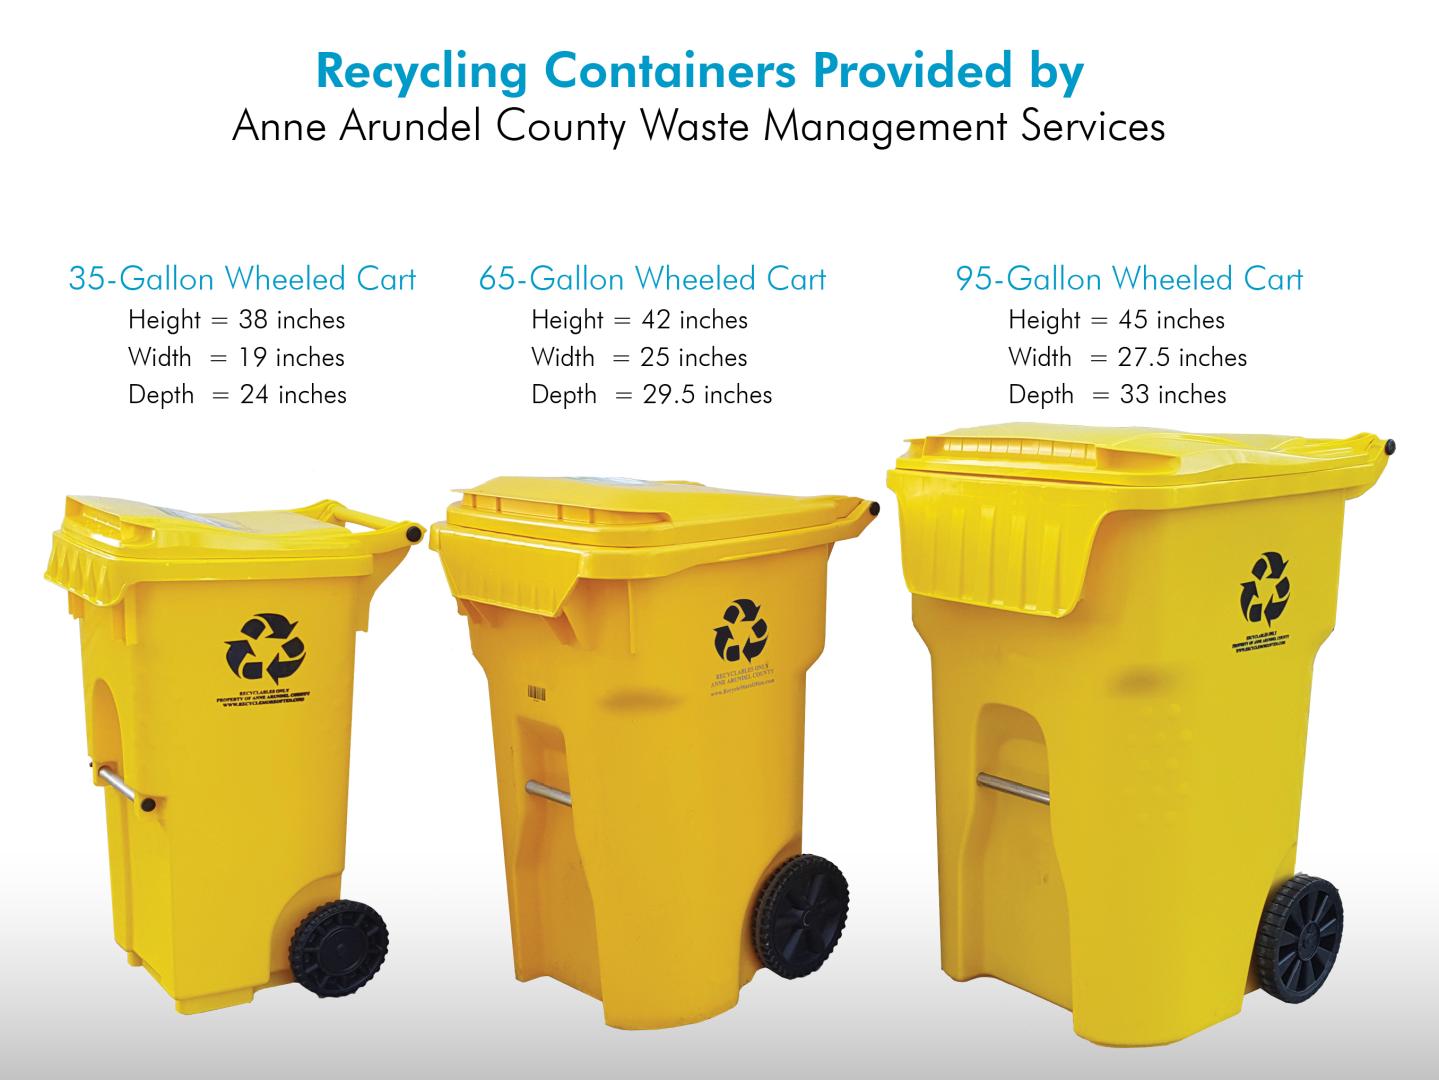 Recycling Containers & Backyard Composting Kits